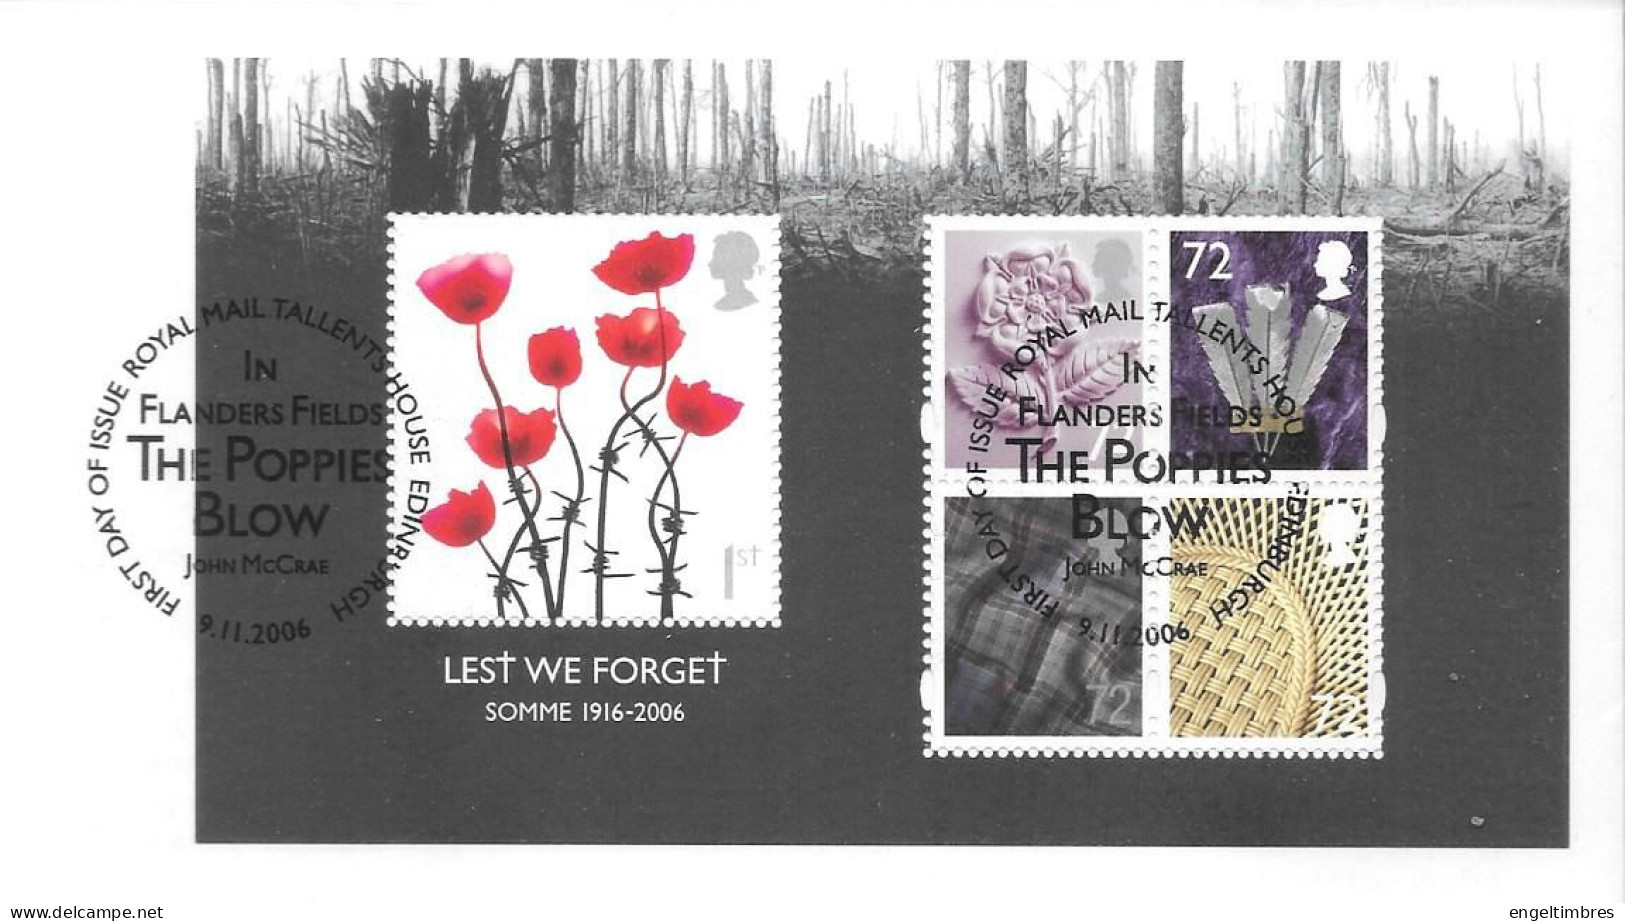 Gb   WW1 1916/2016   " Lest We Forget'  Minisheet   On FDC NOTES SEE NOTES - Covers & Documents